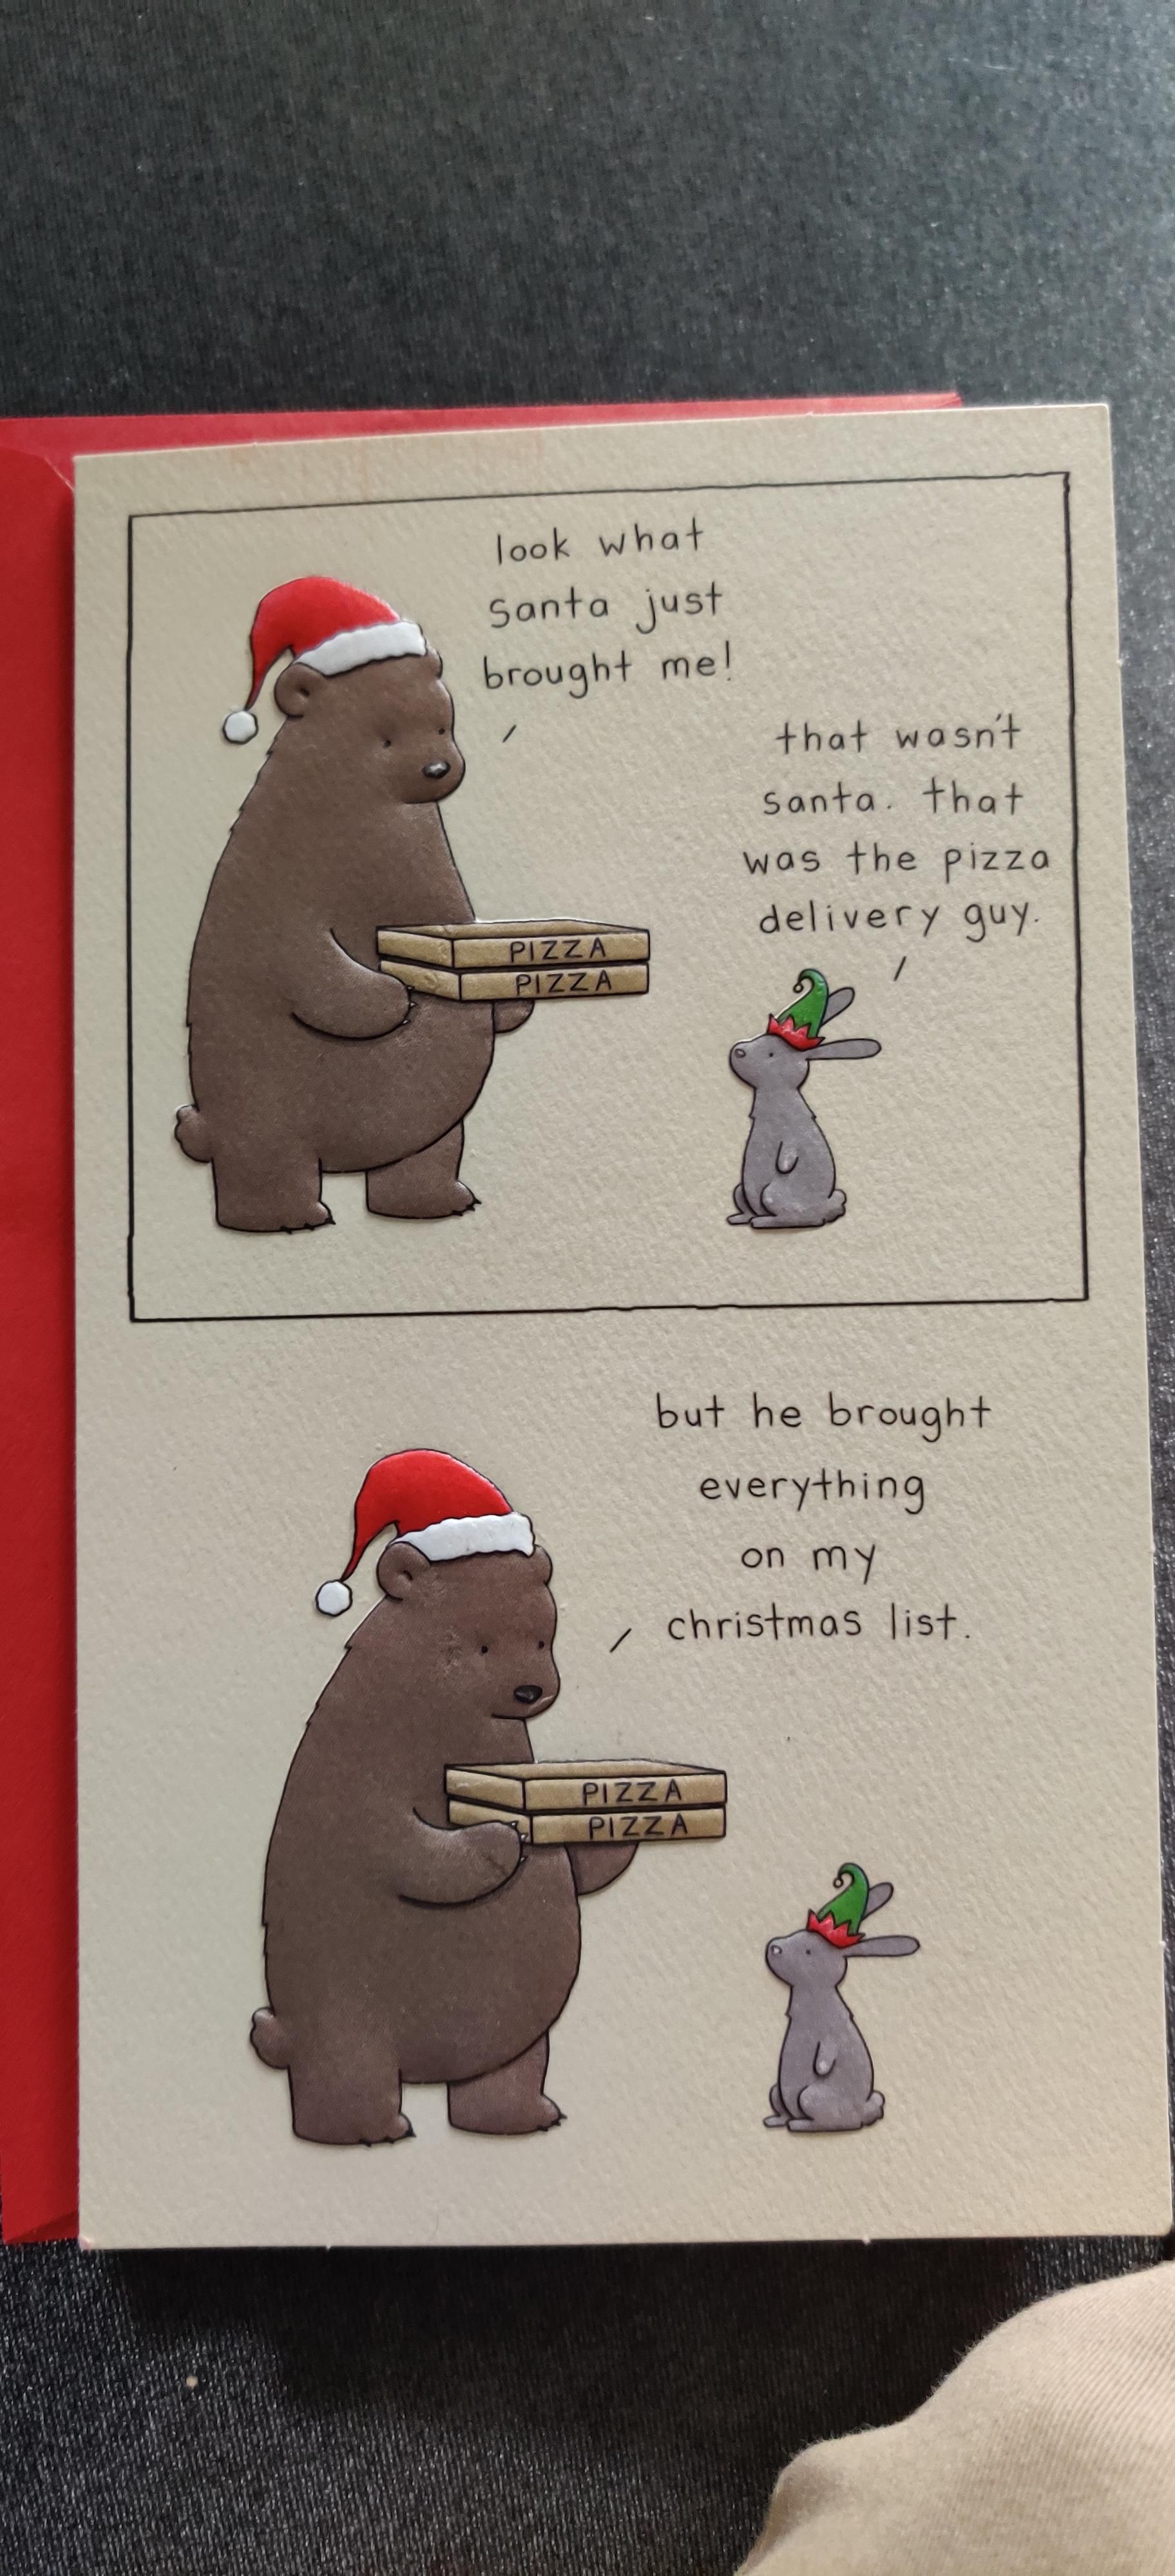 This Christmas card I thought everyone would enjoy